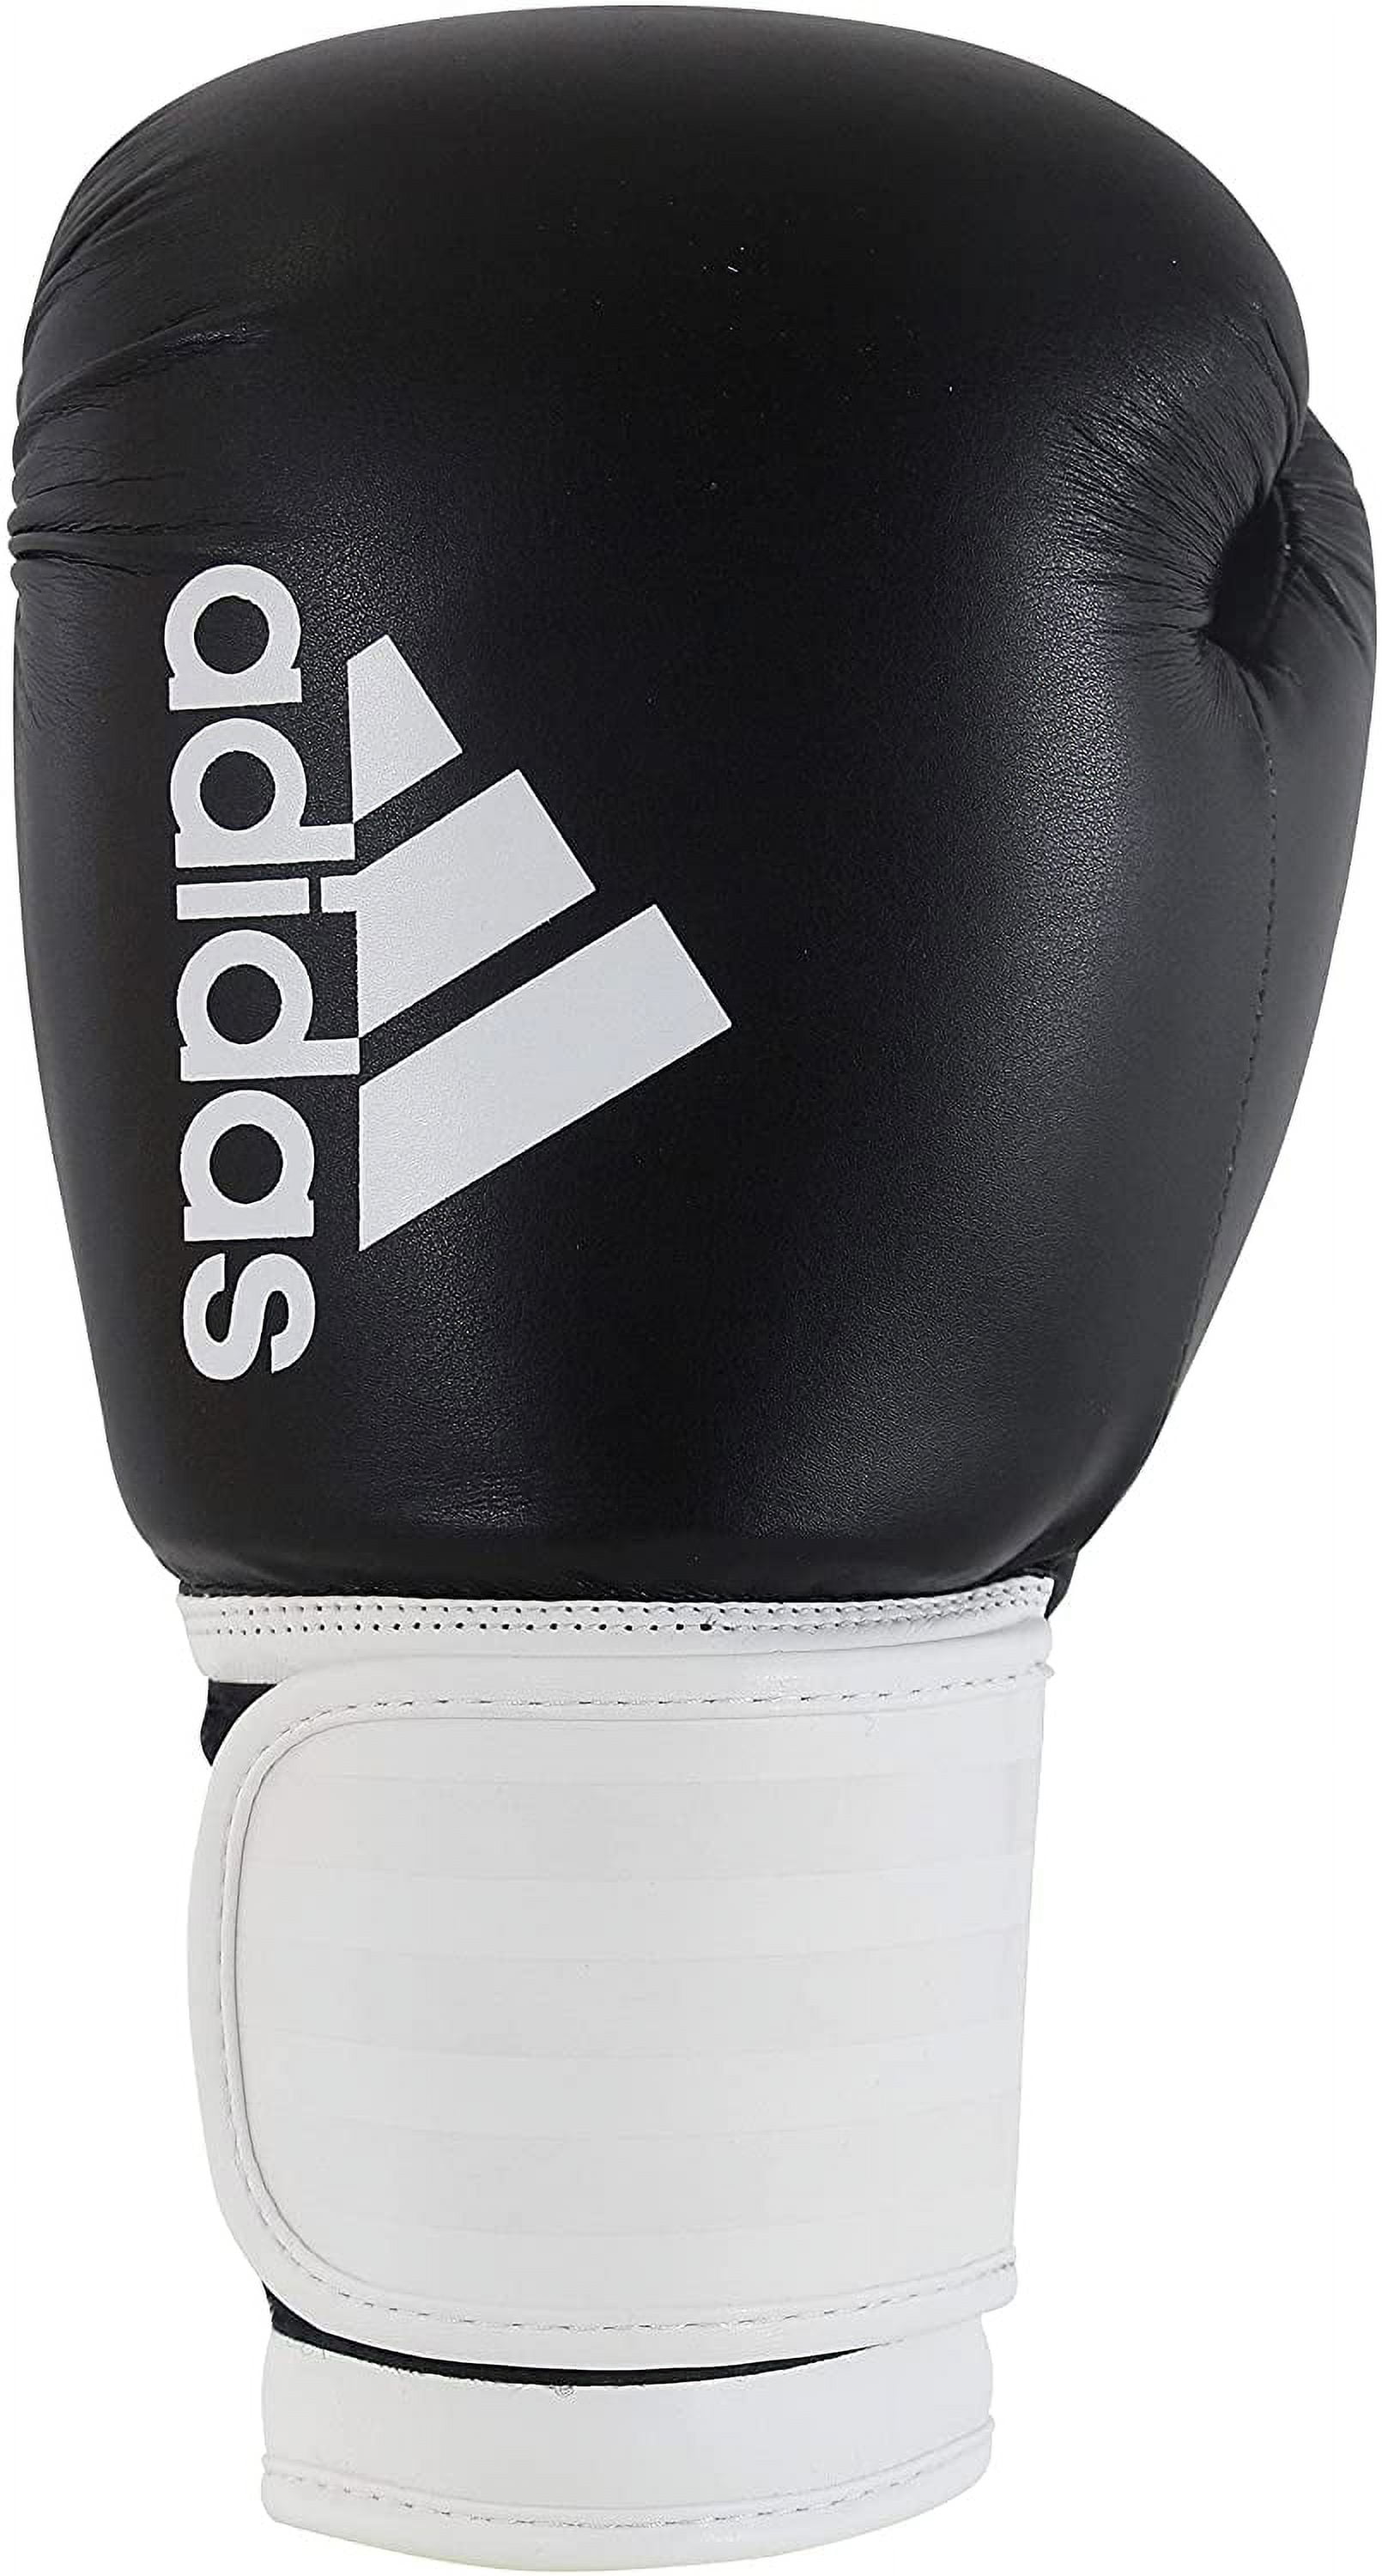 Black/White, - and - and Adidas Kickboxing 16oz Men Women 100 for Punching, - Heavy for - Hybrid Gloves Bags Boxing Fitness and